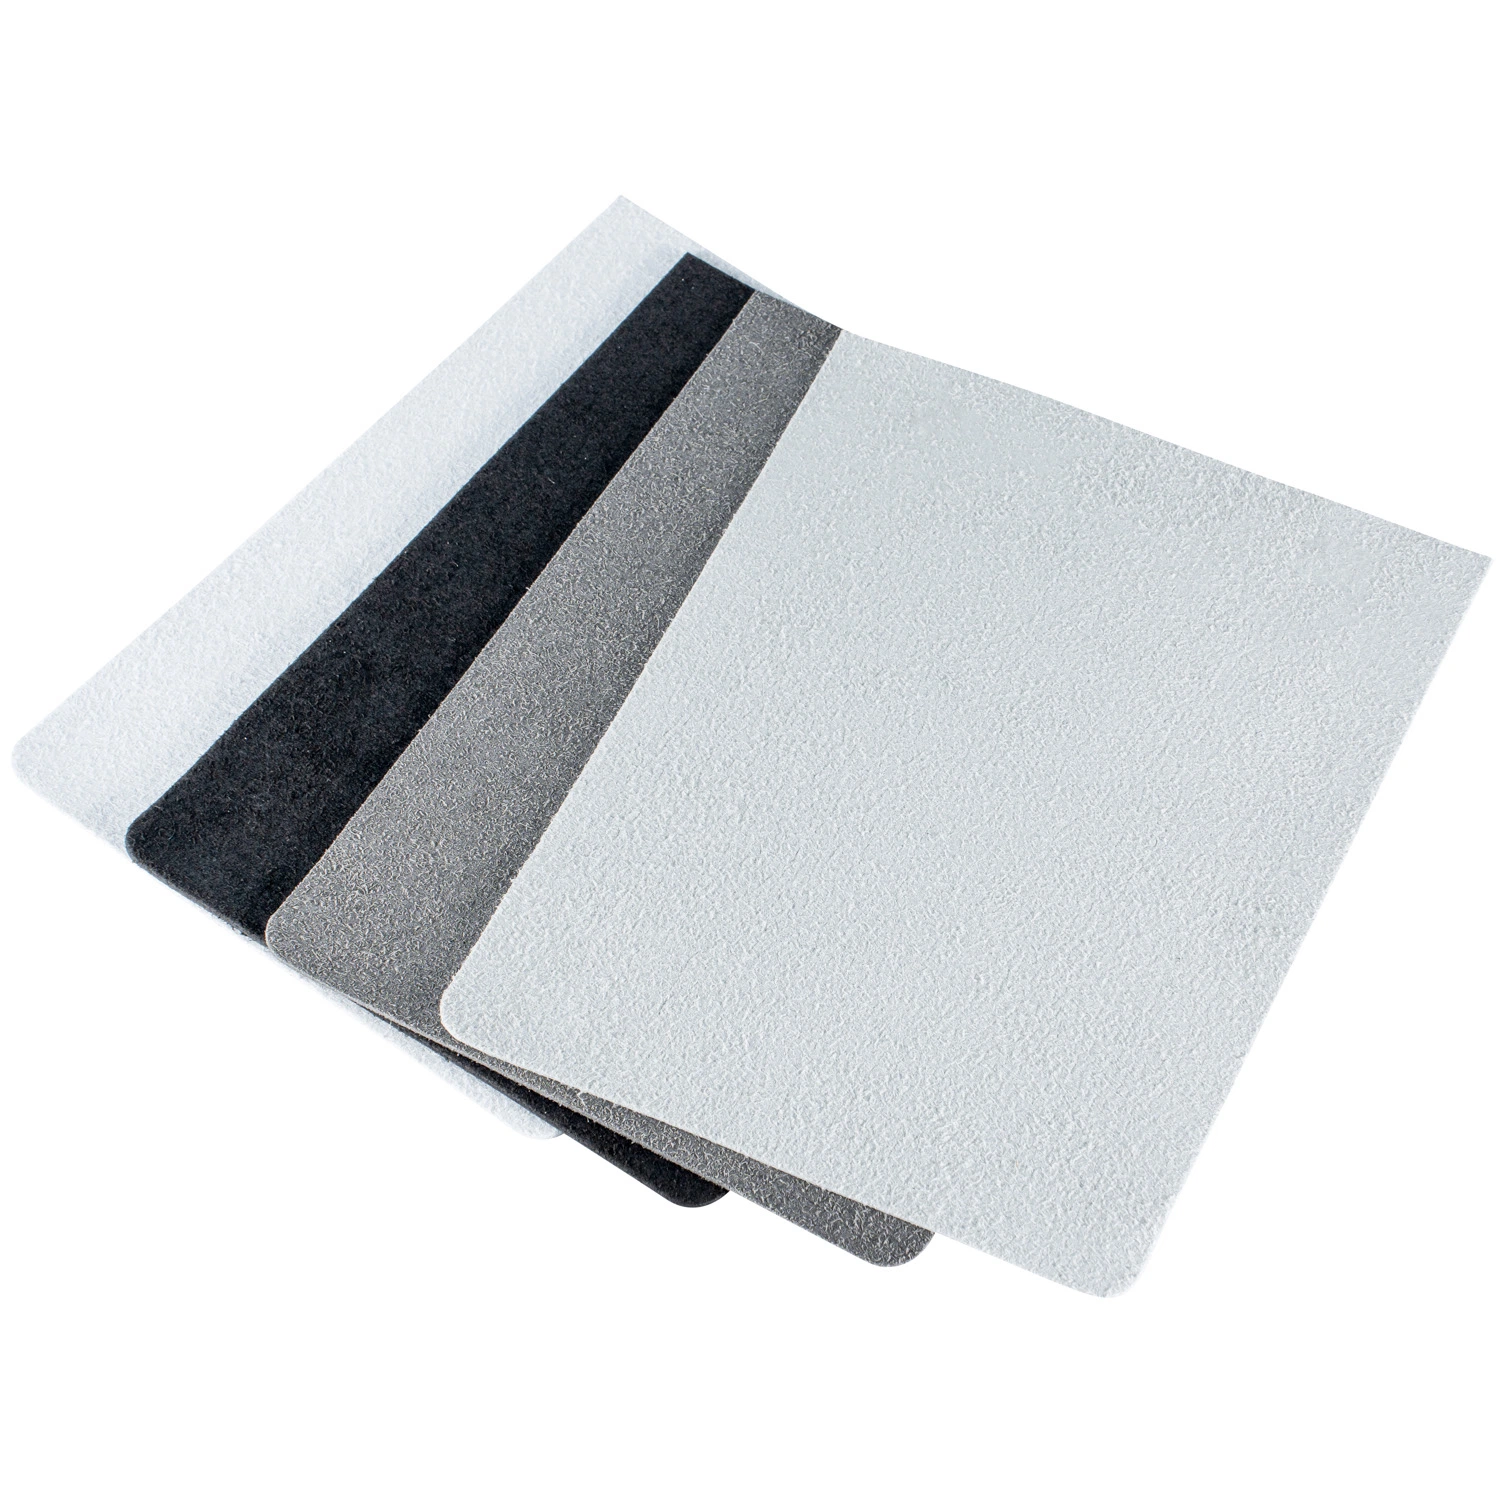 Substrate Nonwoven Microfiber Leather Goods Shoes Lining